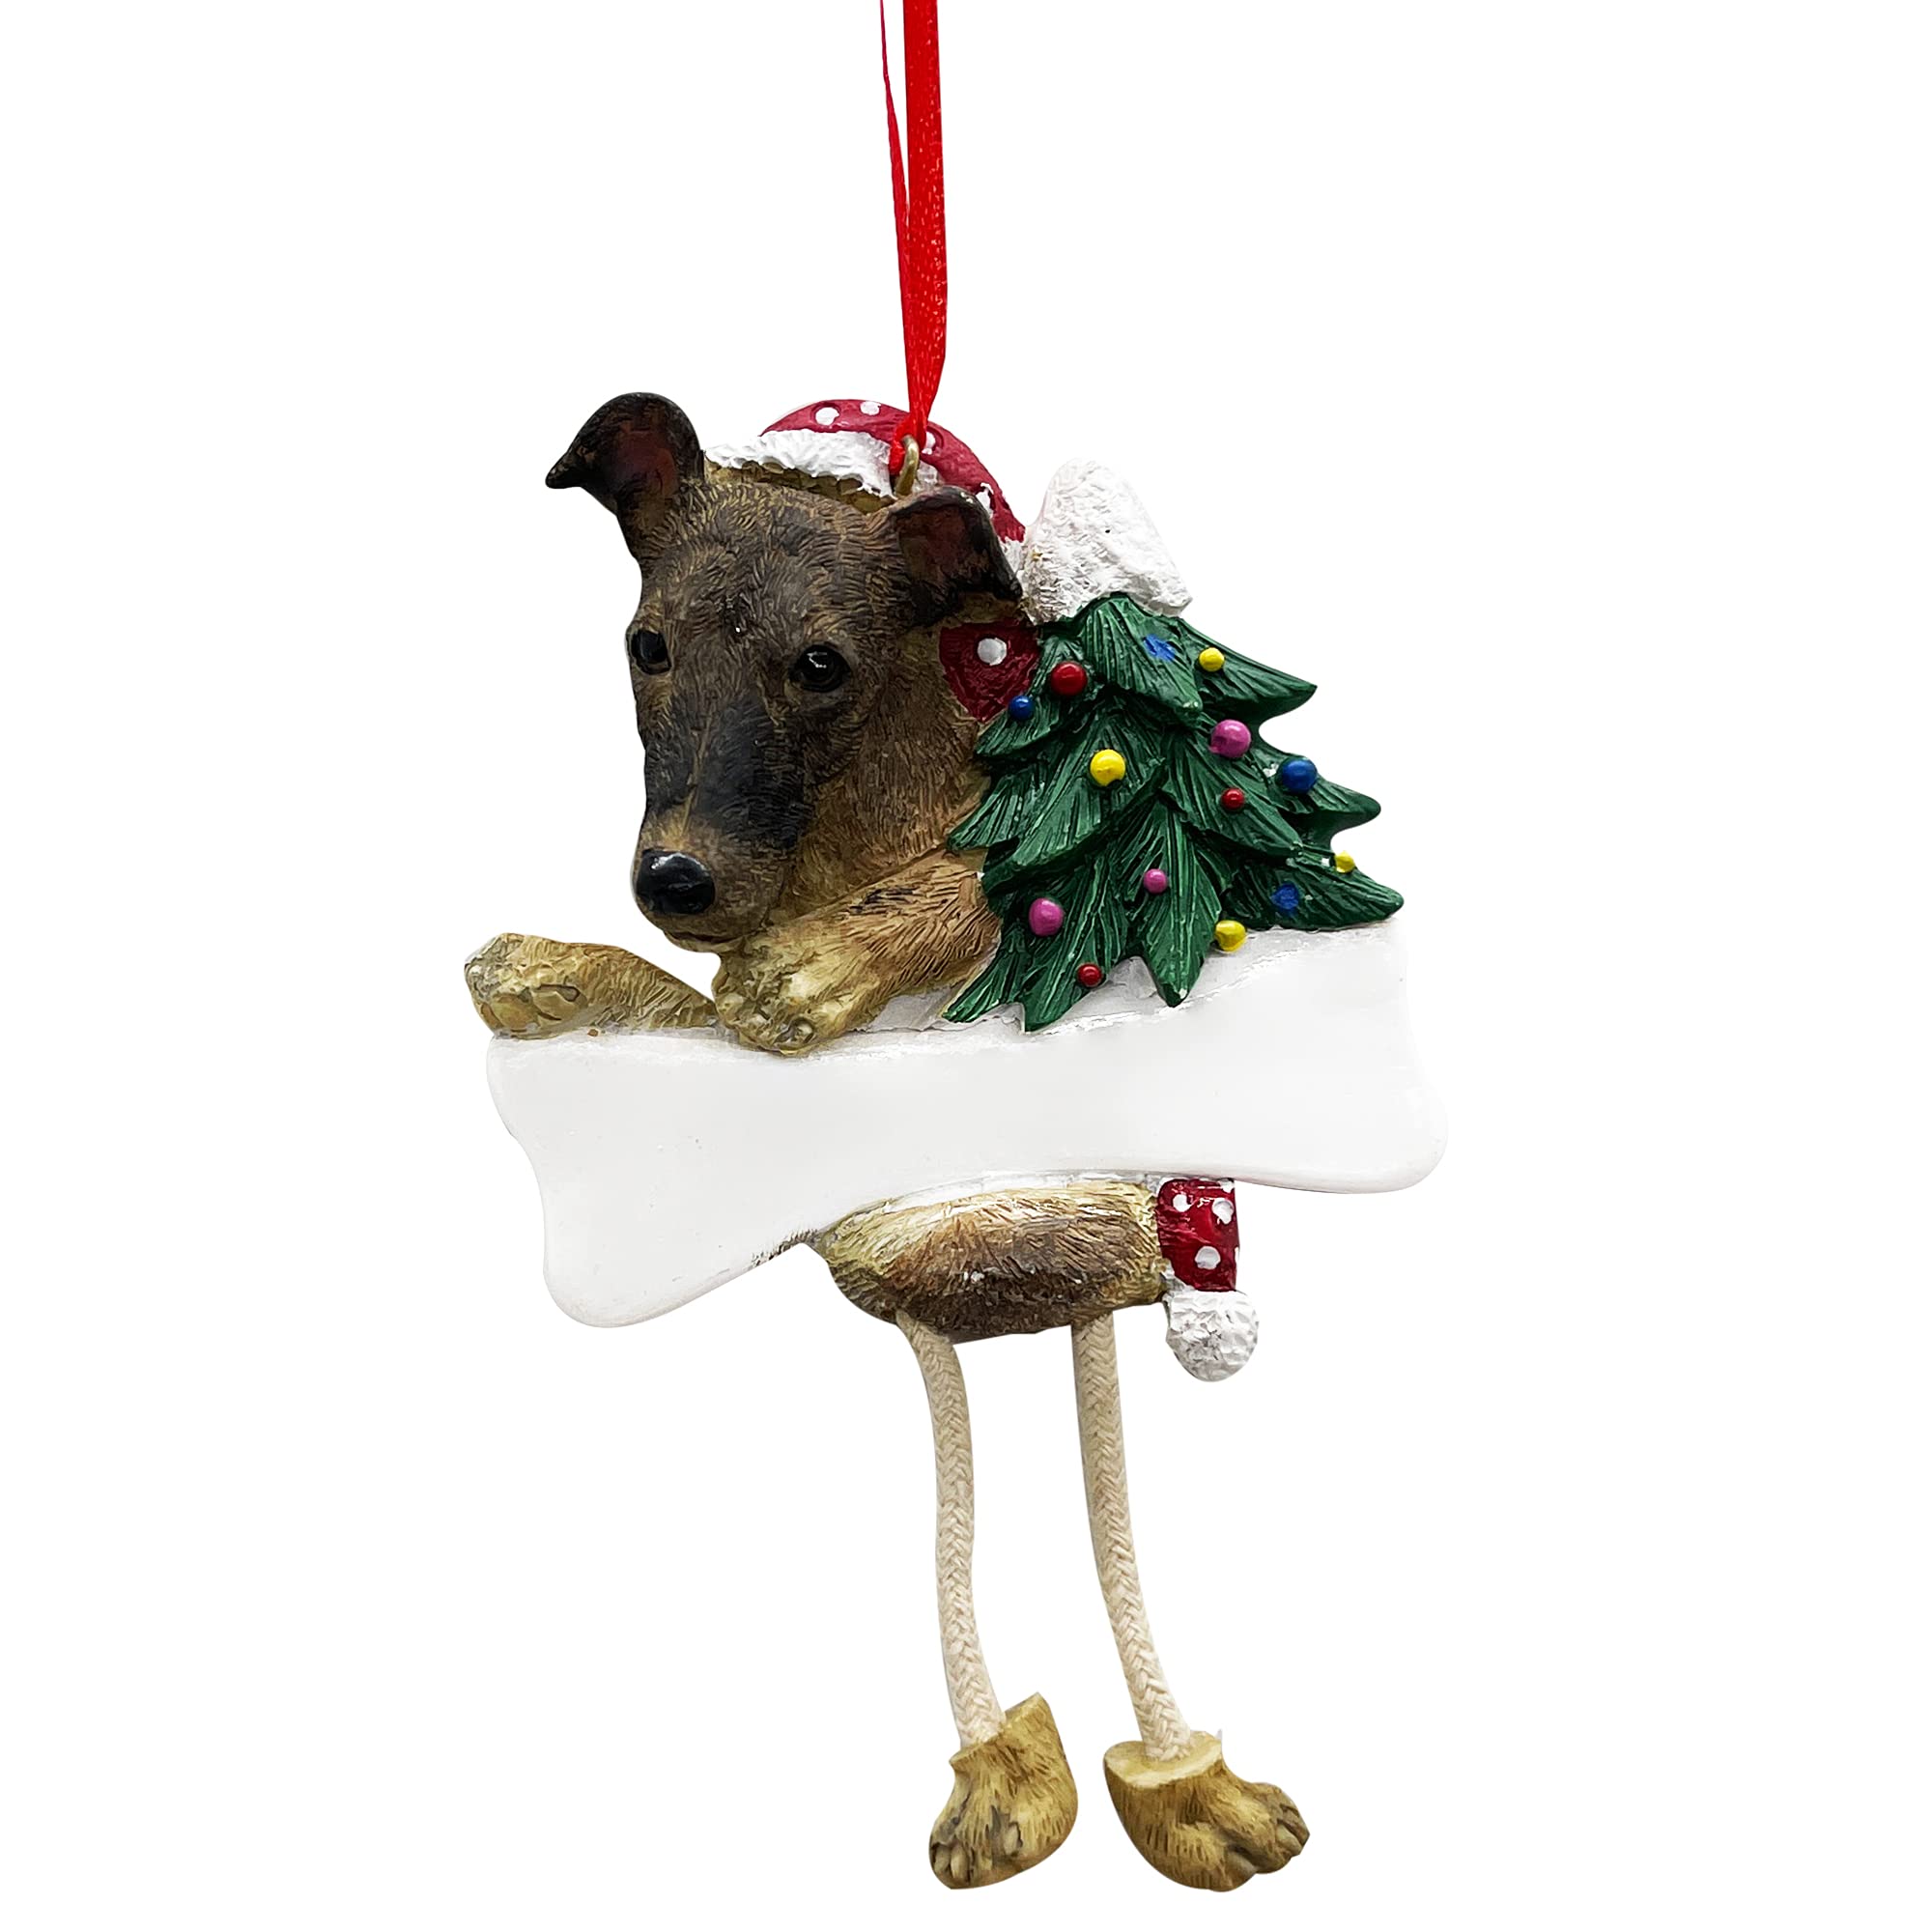 Greyhound Ornament Brindle with Unique "Dangling Legs" Hand Painted and Easily Personalized Christmas Ornament